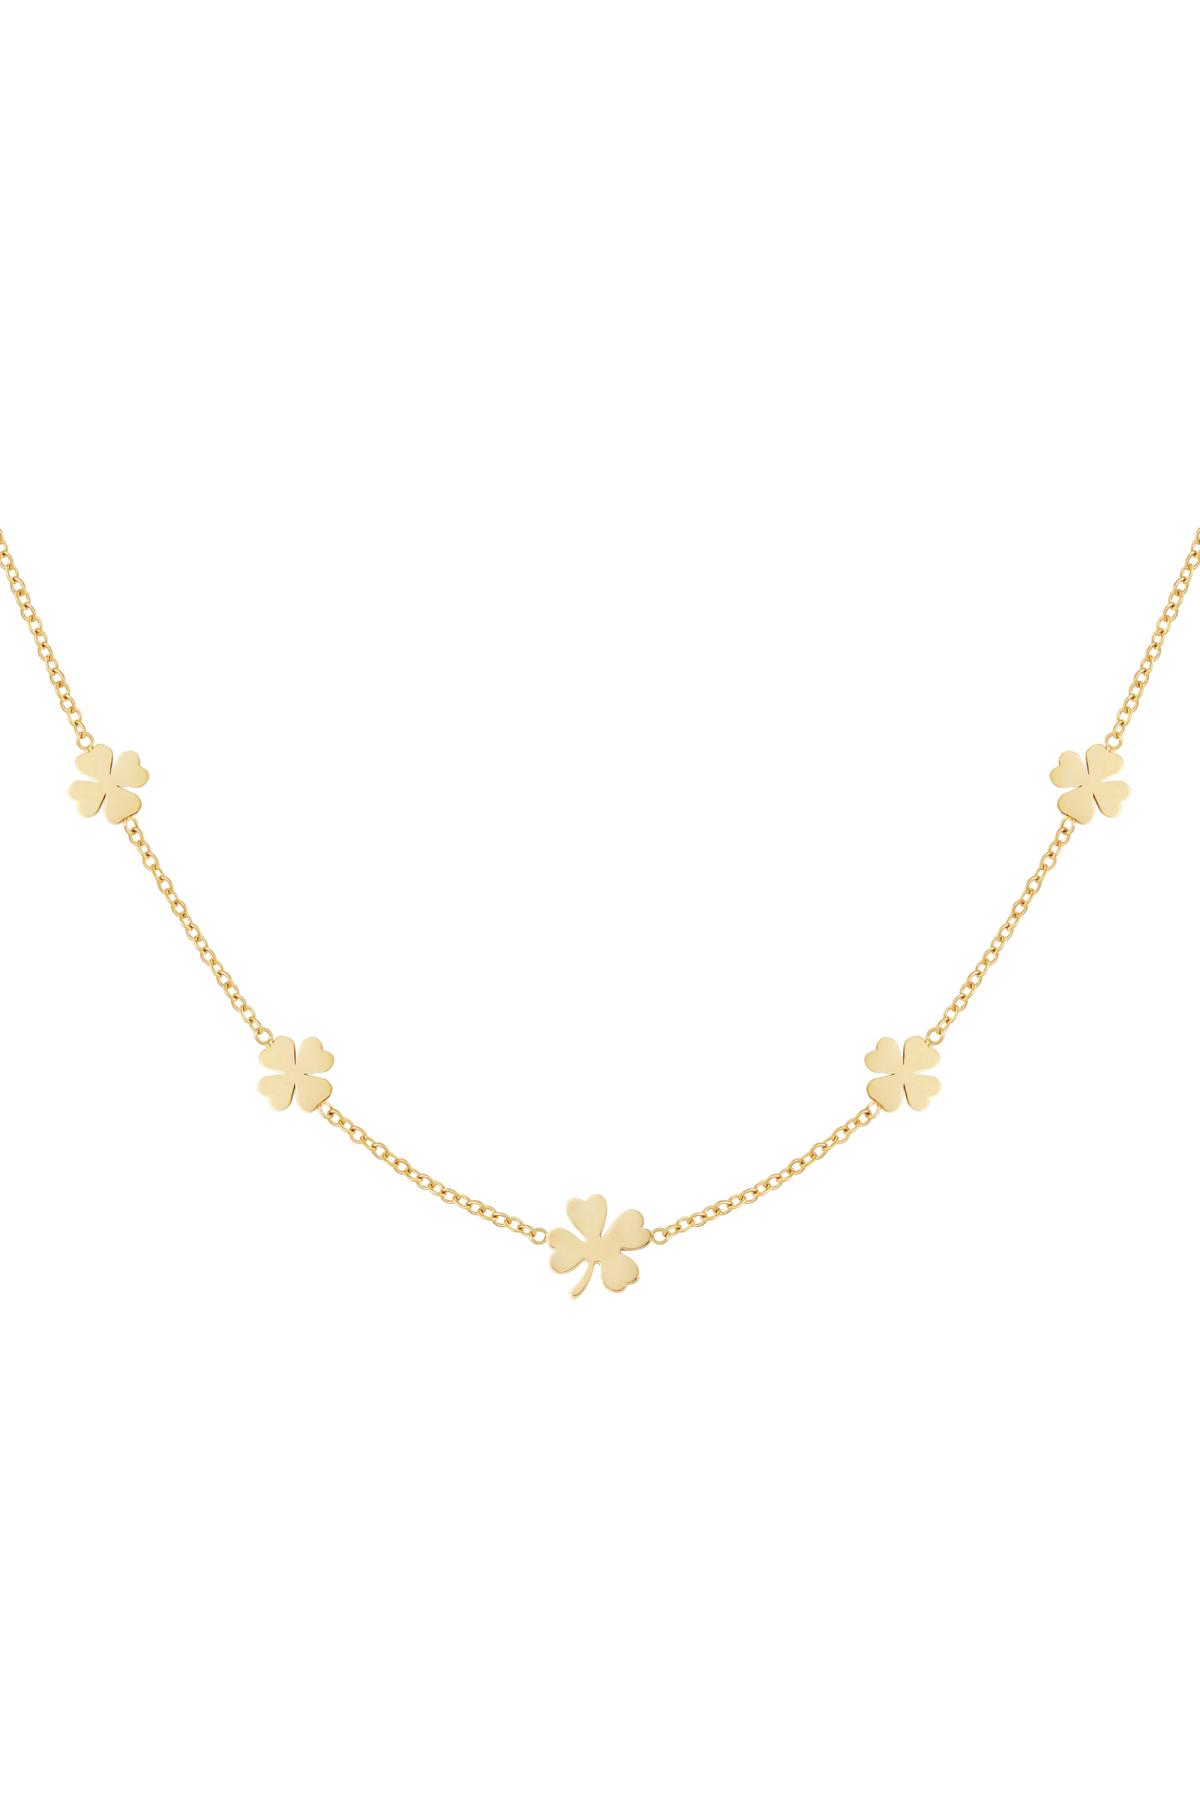 Necklace 5 clovers Gold Stainless Steel h5 